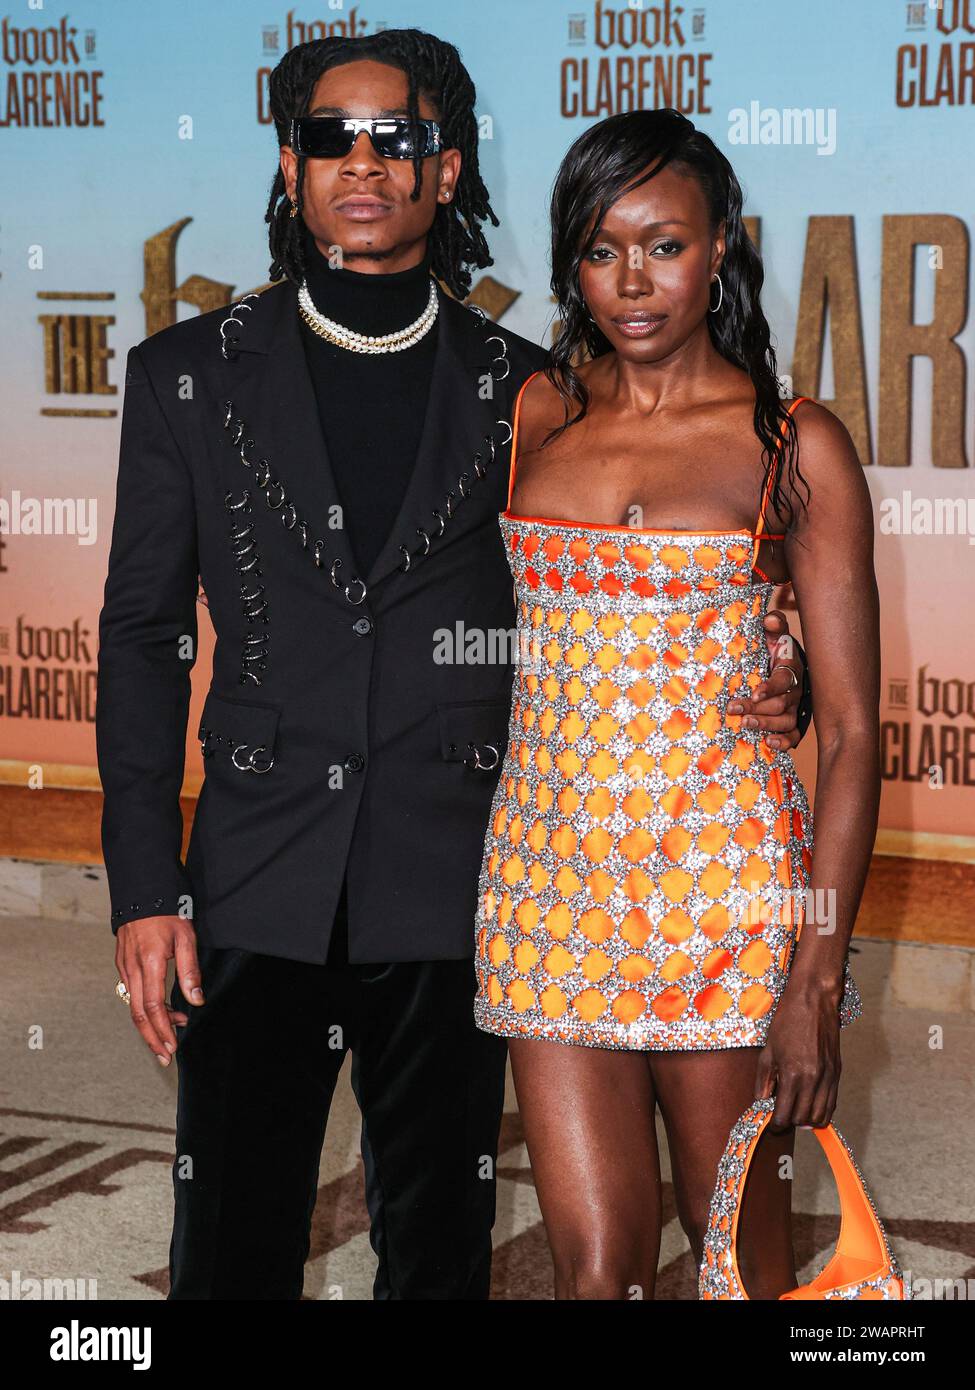 Los Angeles, United States. 05th Jan, 2024. LOS ANGELES, CALIFORNIA, USA - JANUARY 05: RJ Cyler and Anna Diop arrive at the Los Angeles Premiere Of Sony Pictures' 'The Book of Clarence' held at the David Geffen Theater at the Academy Museum of Motion Pictures on January 5, 2024 in Los Angeles, California, United States. (Photo by Xavier Collin/Image Press Agency) Credit: Image Press Agency/Alamy Live News Stock Photo